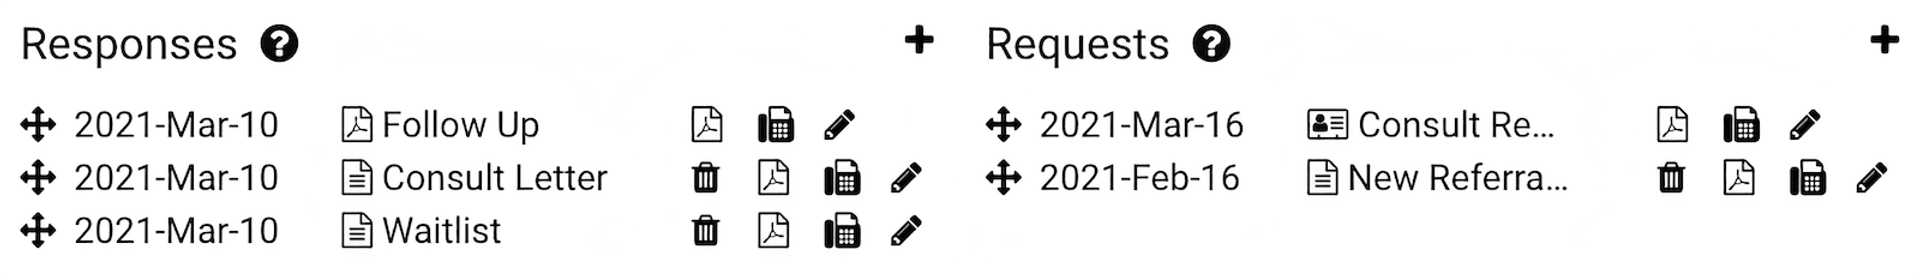 Responses and Requests workspace with various dates and icons.